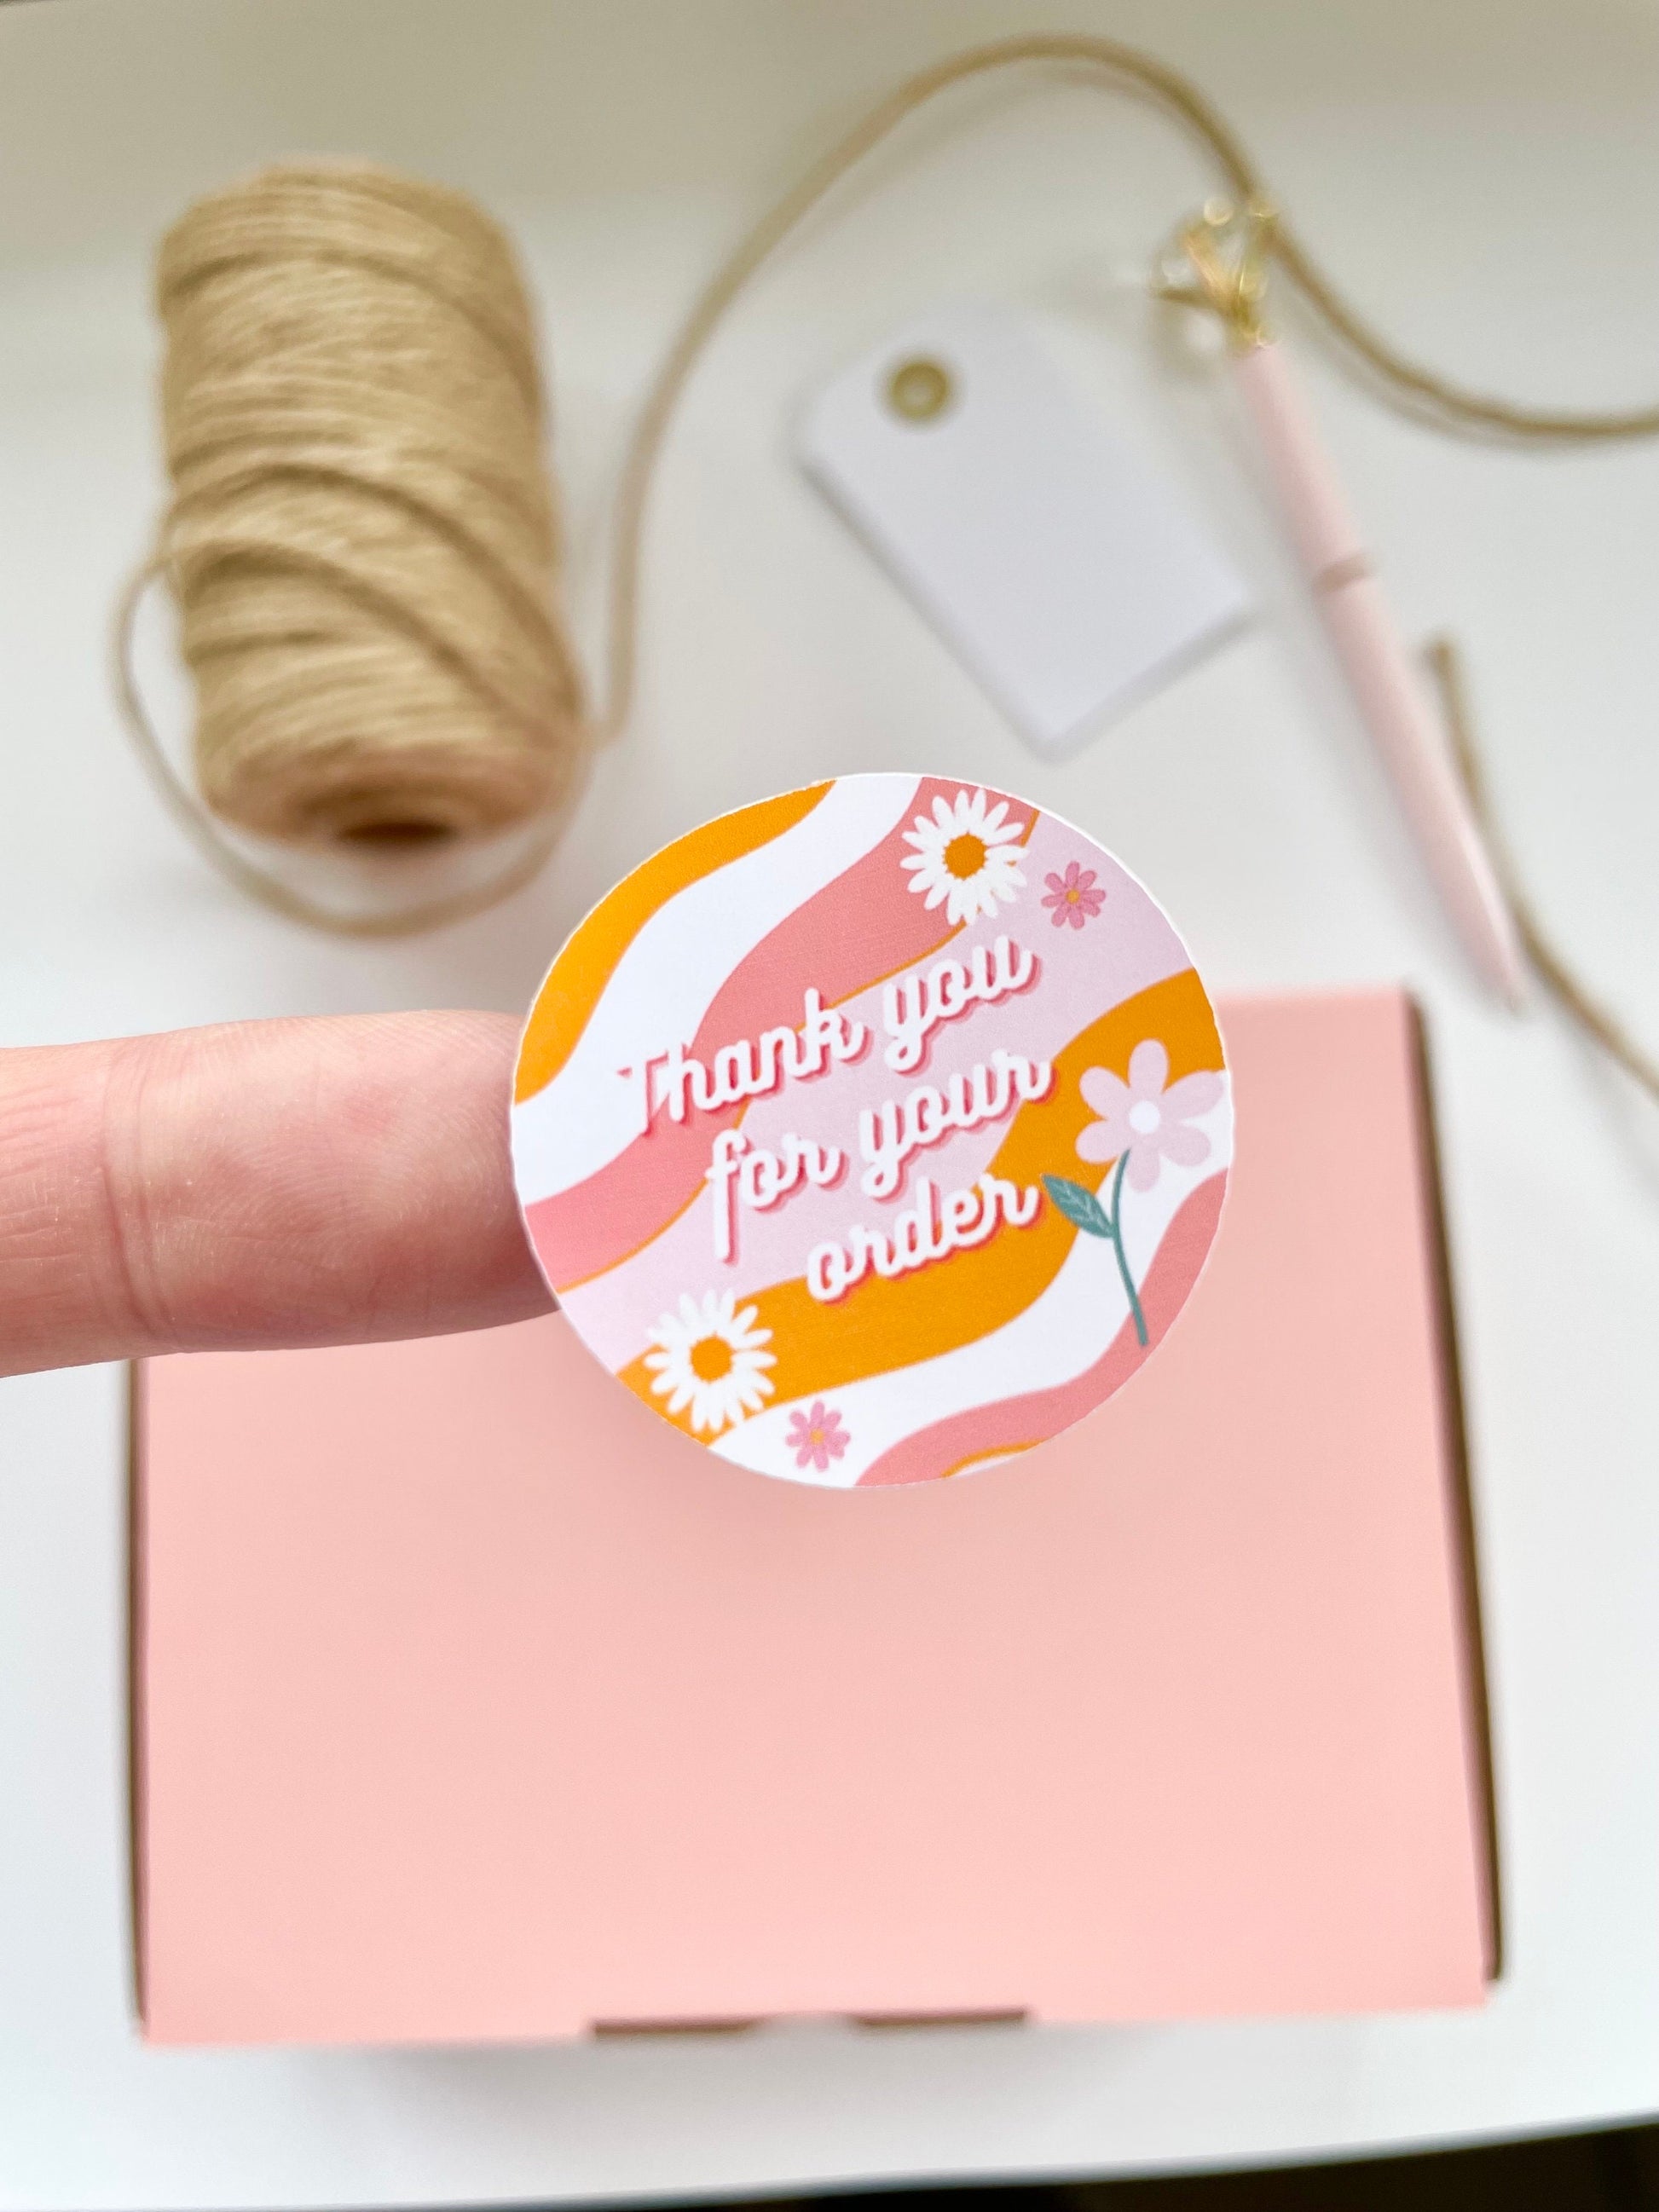 Thank You For Your Order retro stickers | 38mm Sticker | Small Business Labels